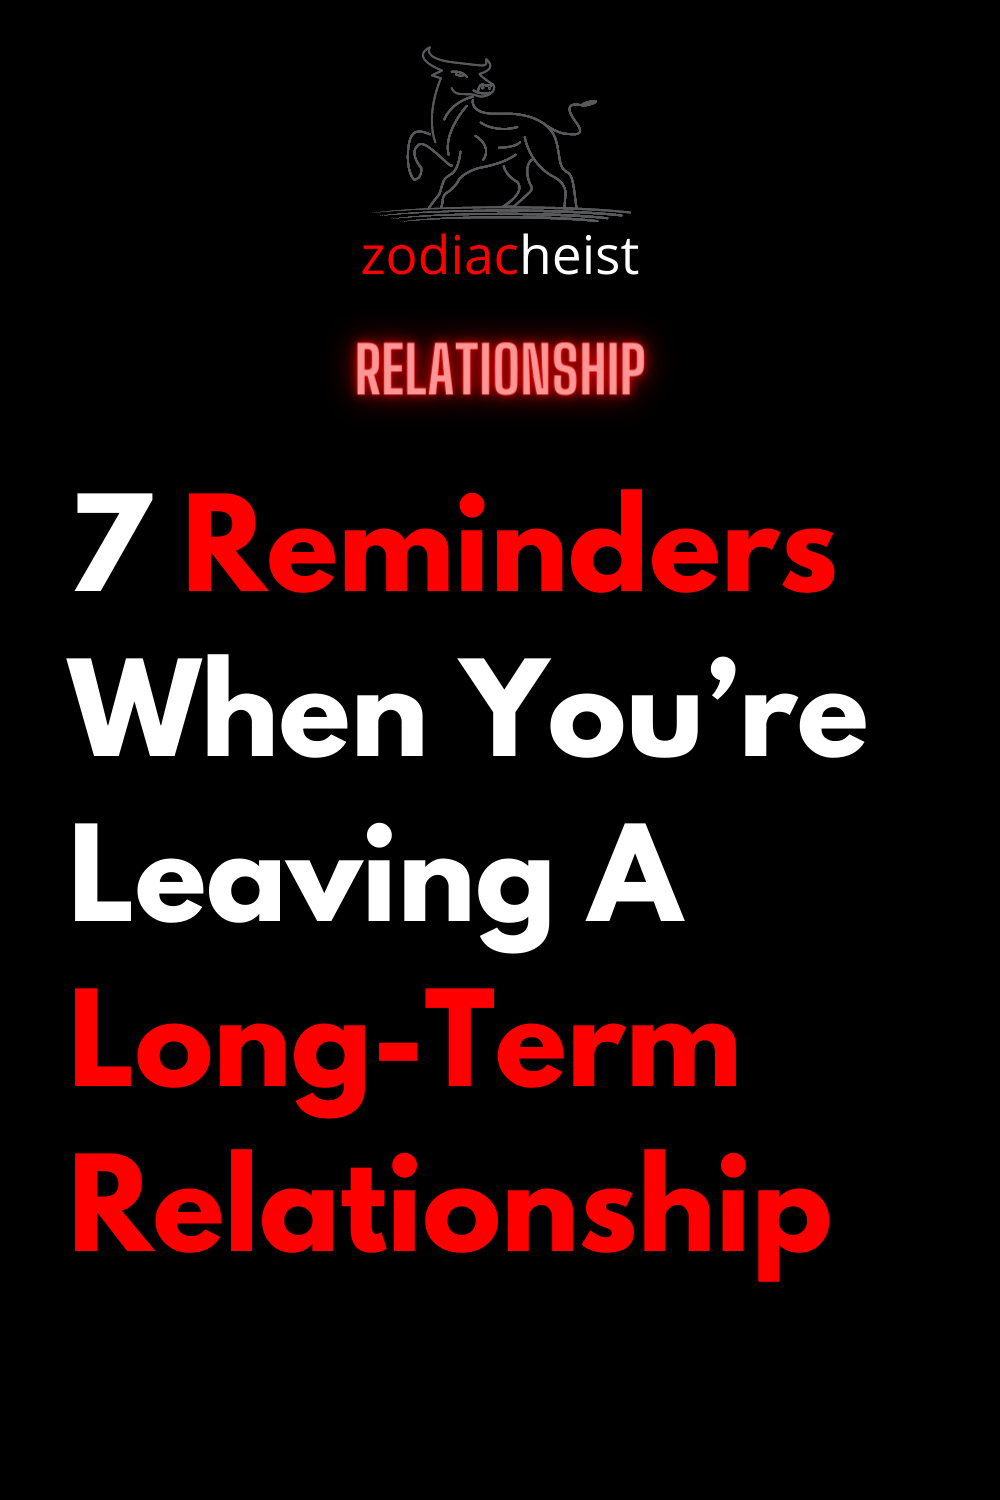 7 Reminders When You’re Leaving A Long-Term Relationship